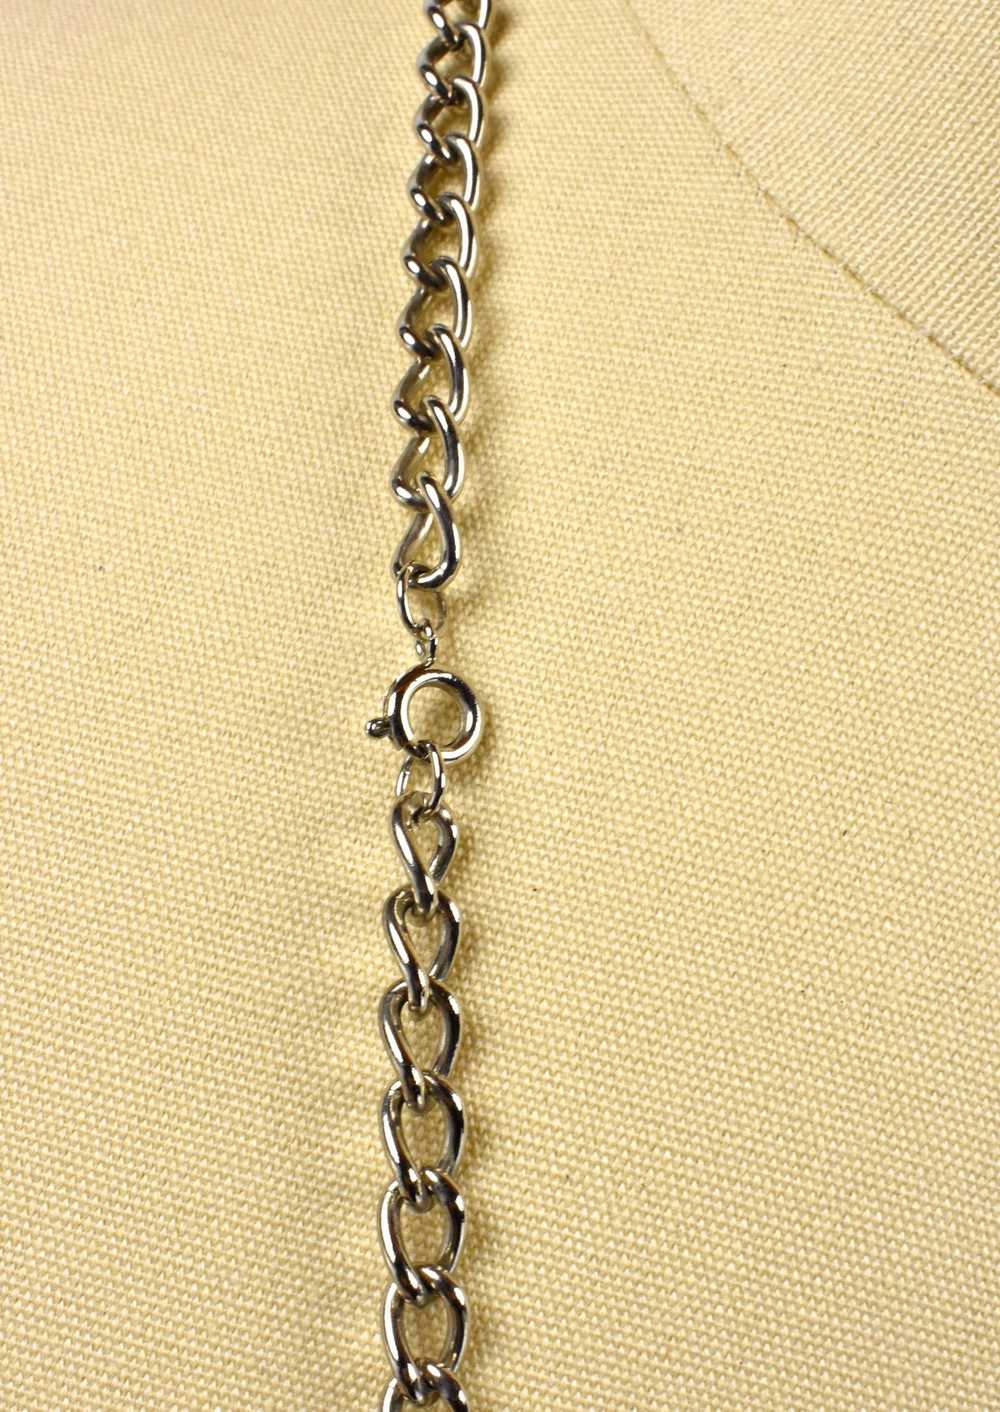 1980's-1990's TOPS Large Collection Charm Necklace - image 6